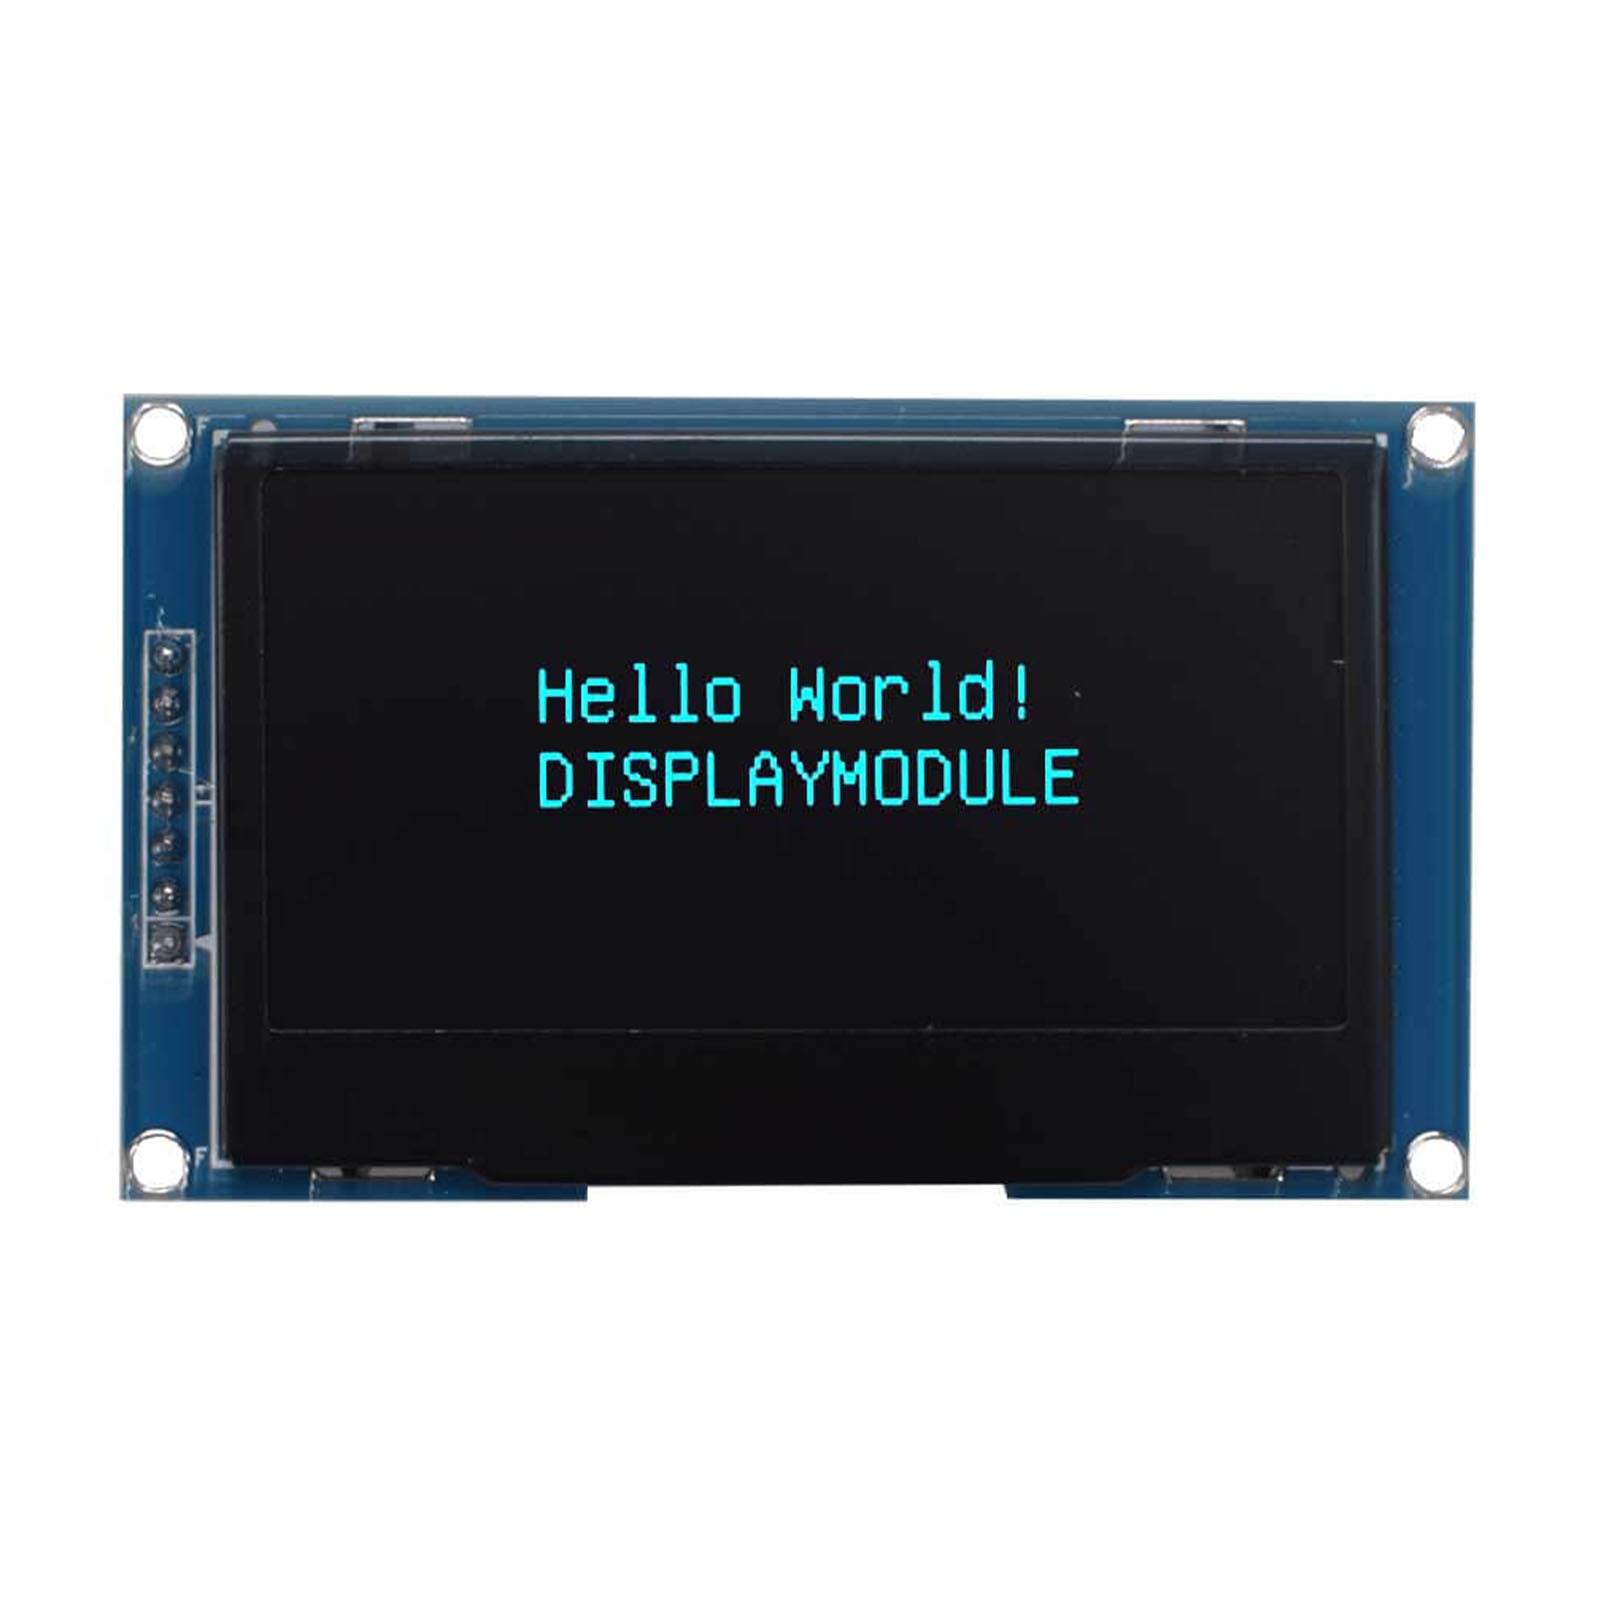 2.4-inch OLED display screen showing the blue characters 'Hello World! DISPLAYMODULE'